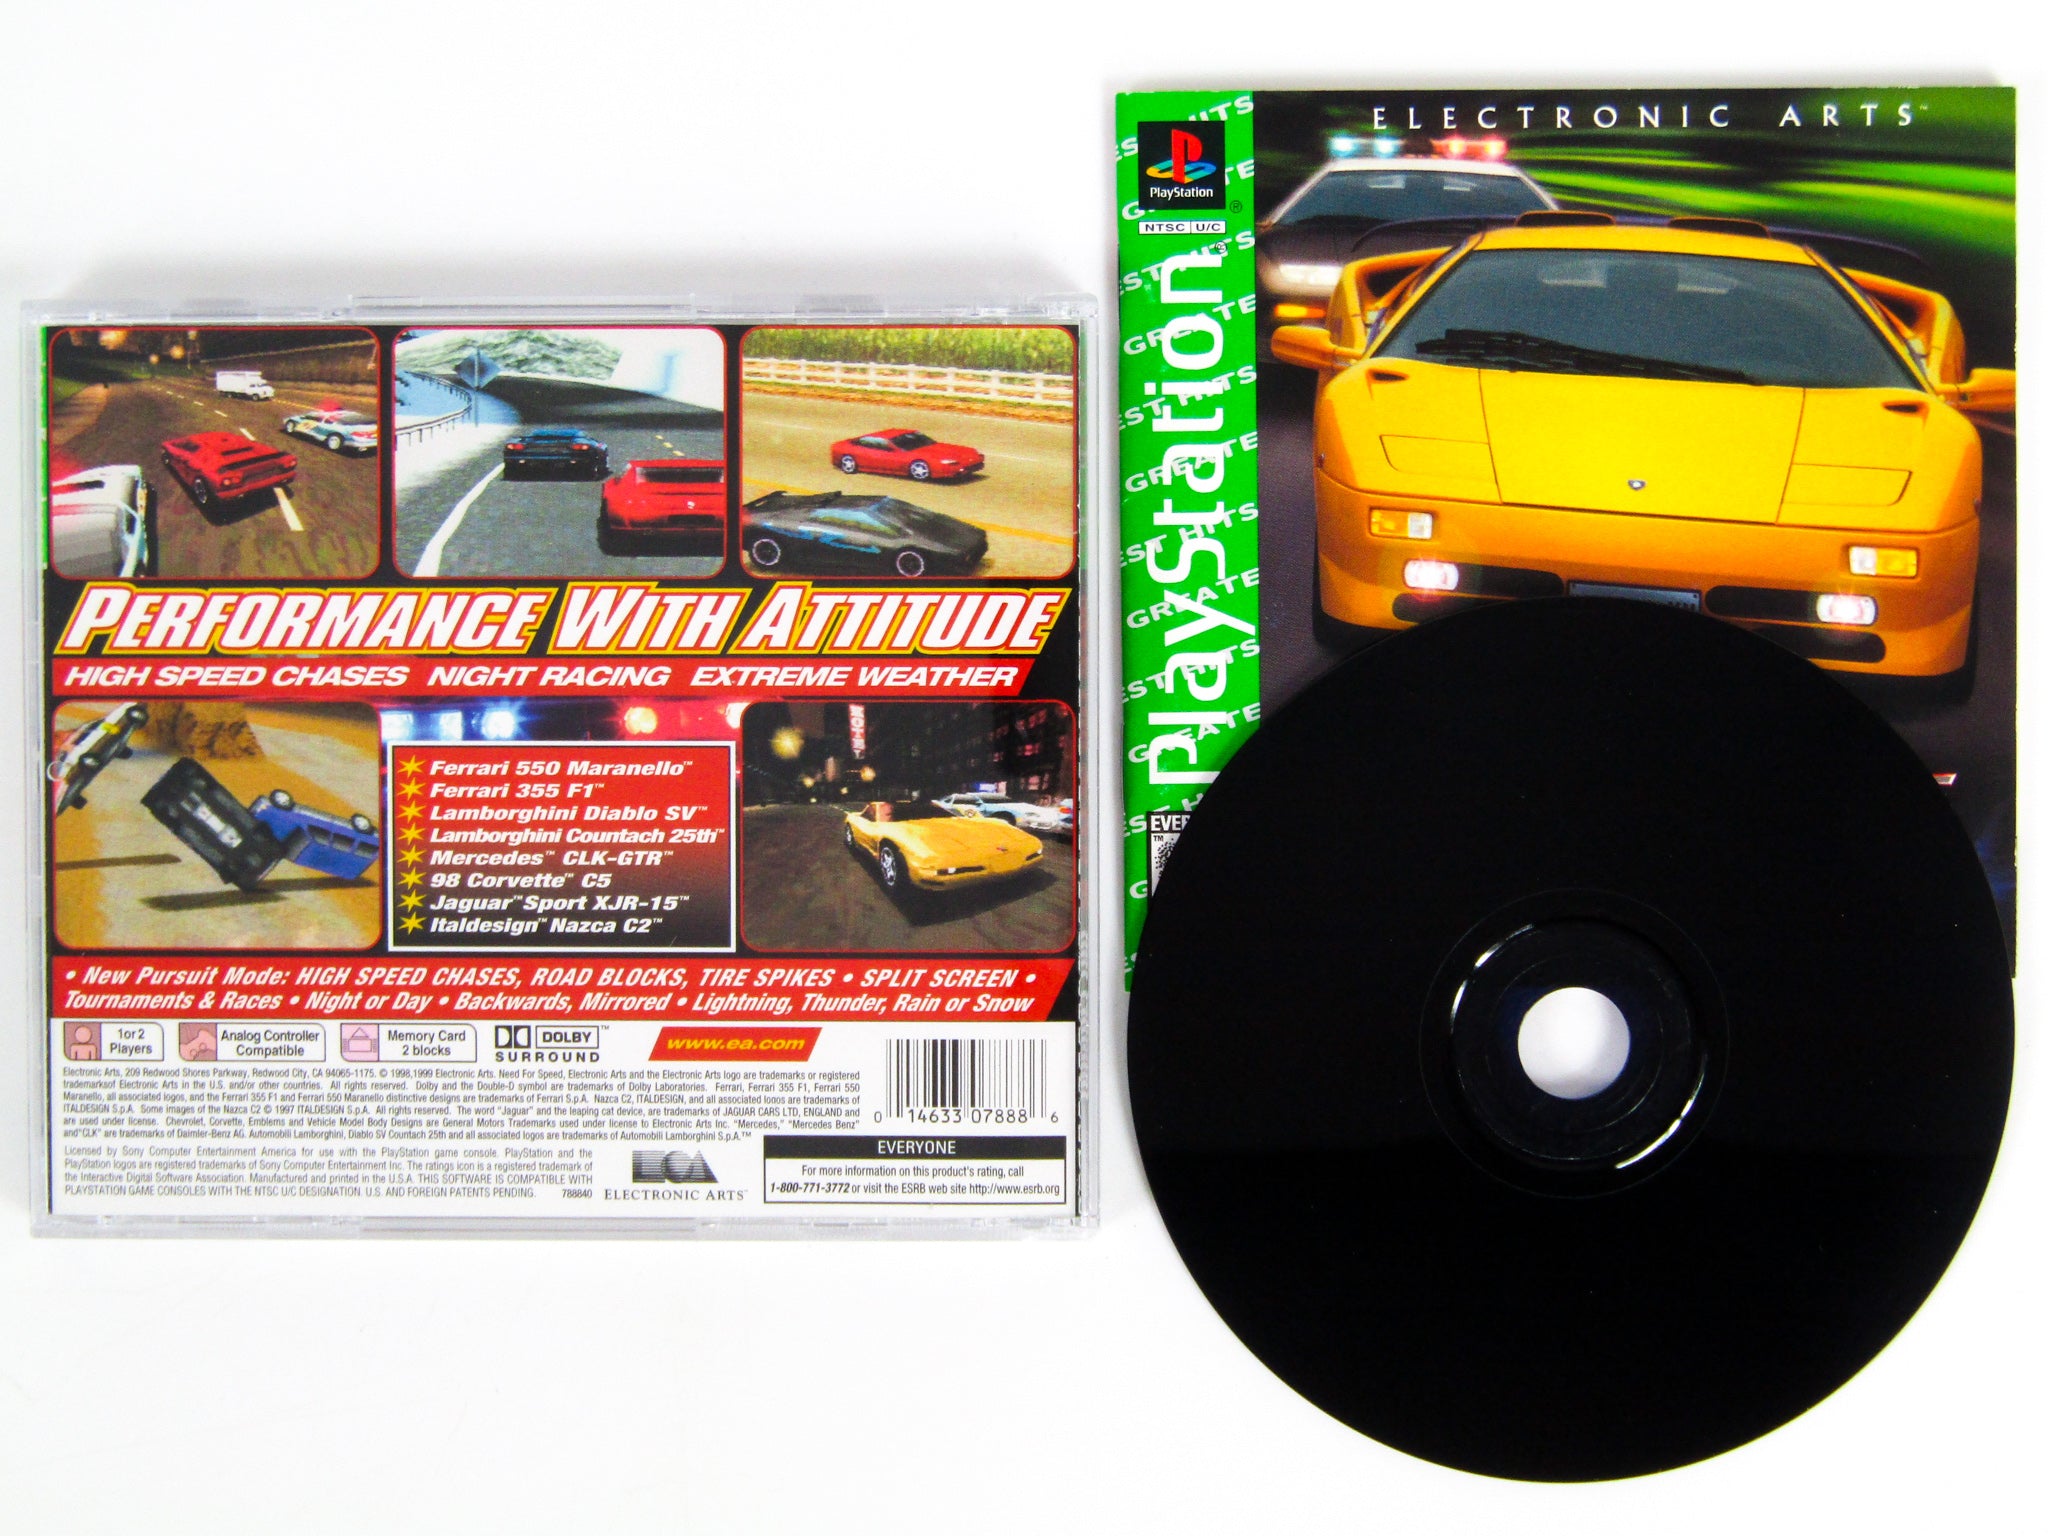 NEED FOR SPEED PS1 Bundle  Need For Speed, II, III: Hot Pursuit, High  Stakes $115.50 - PicClick AU